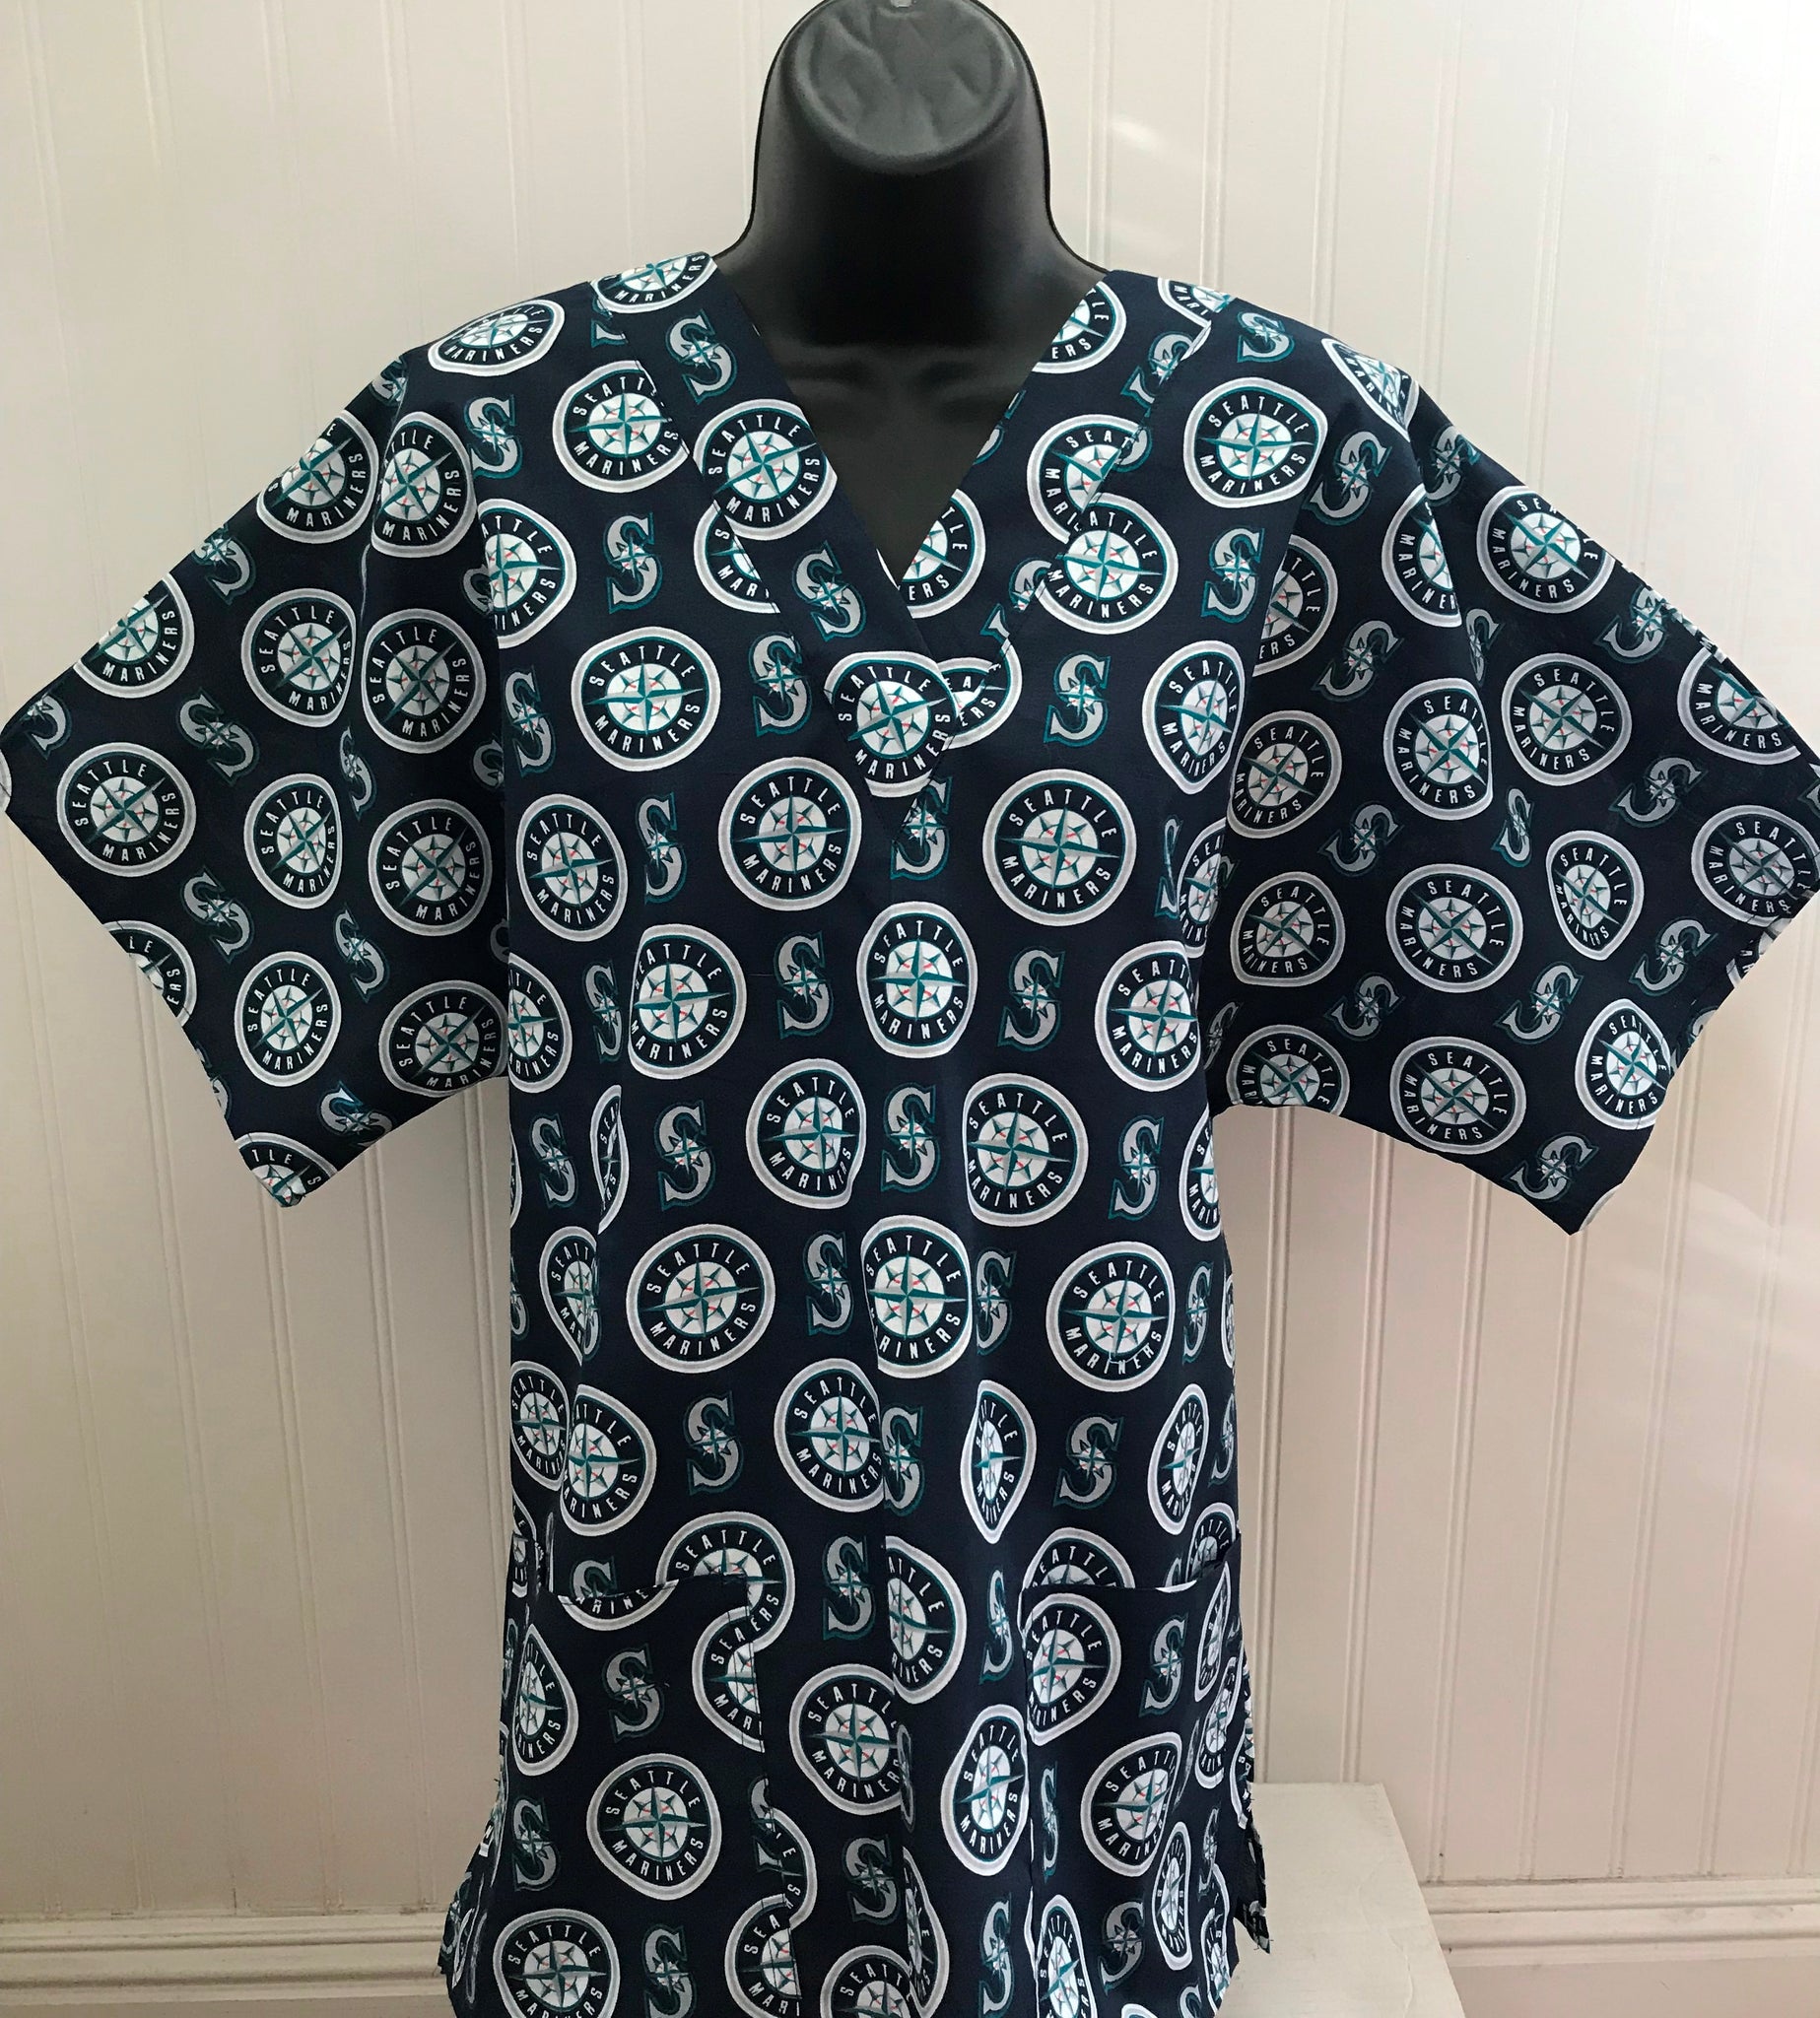 Seattle Mariners Nurse Scrubs Top Adult L/XL Pre-Owned